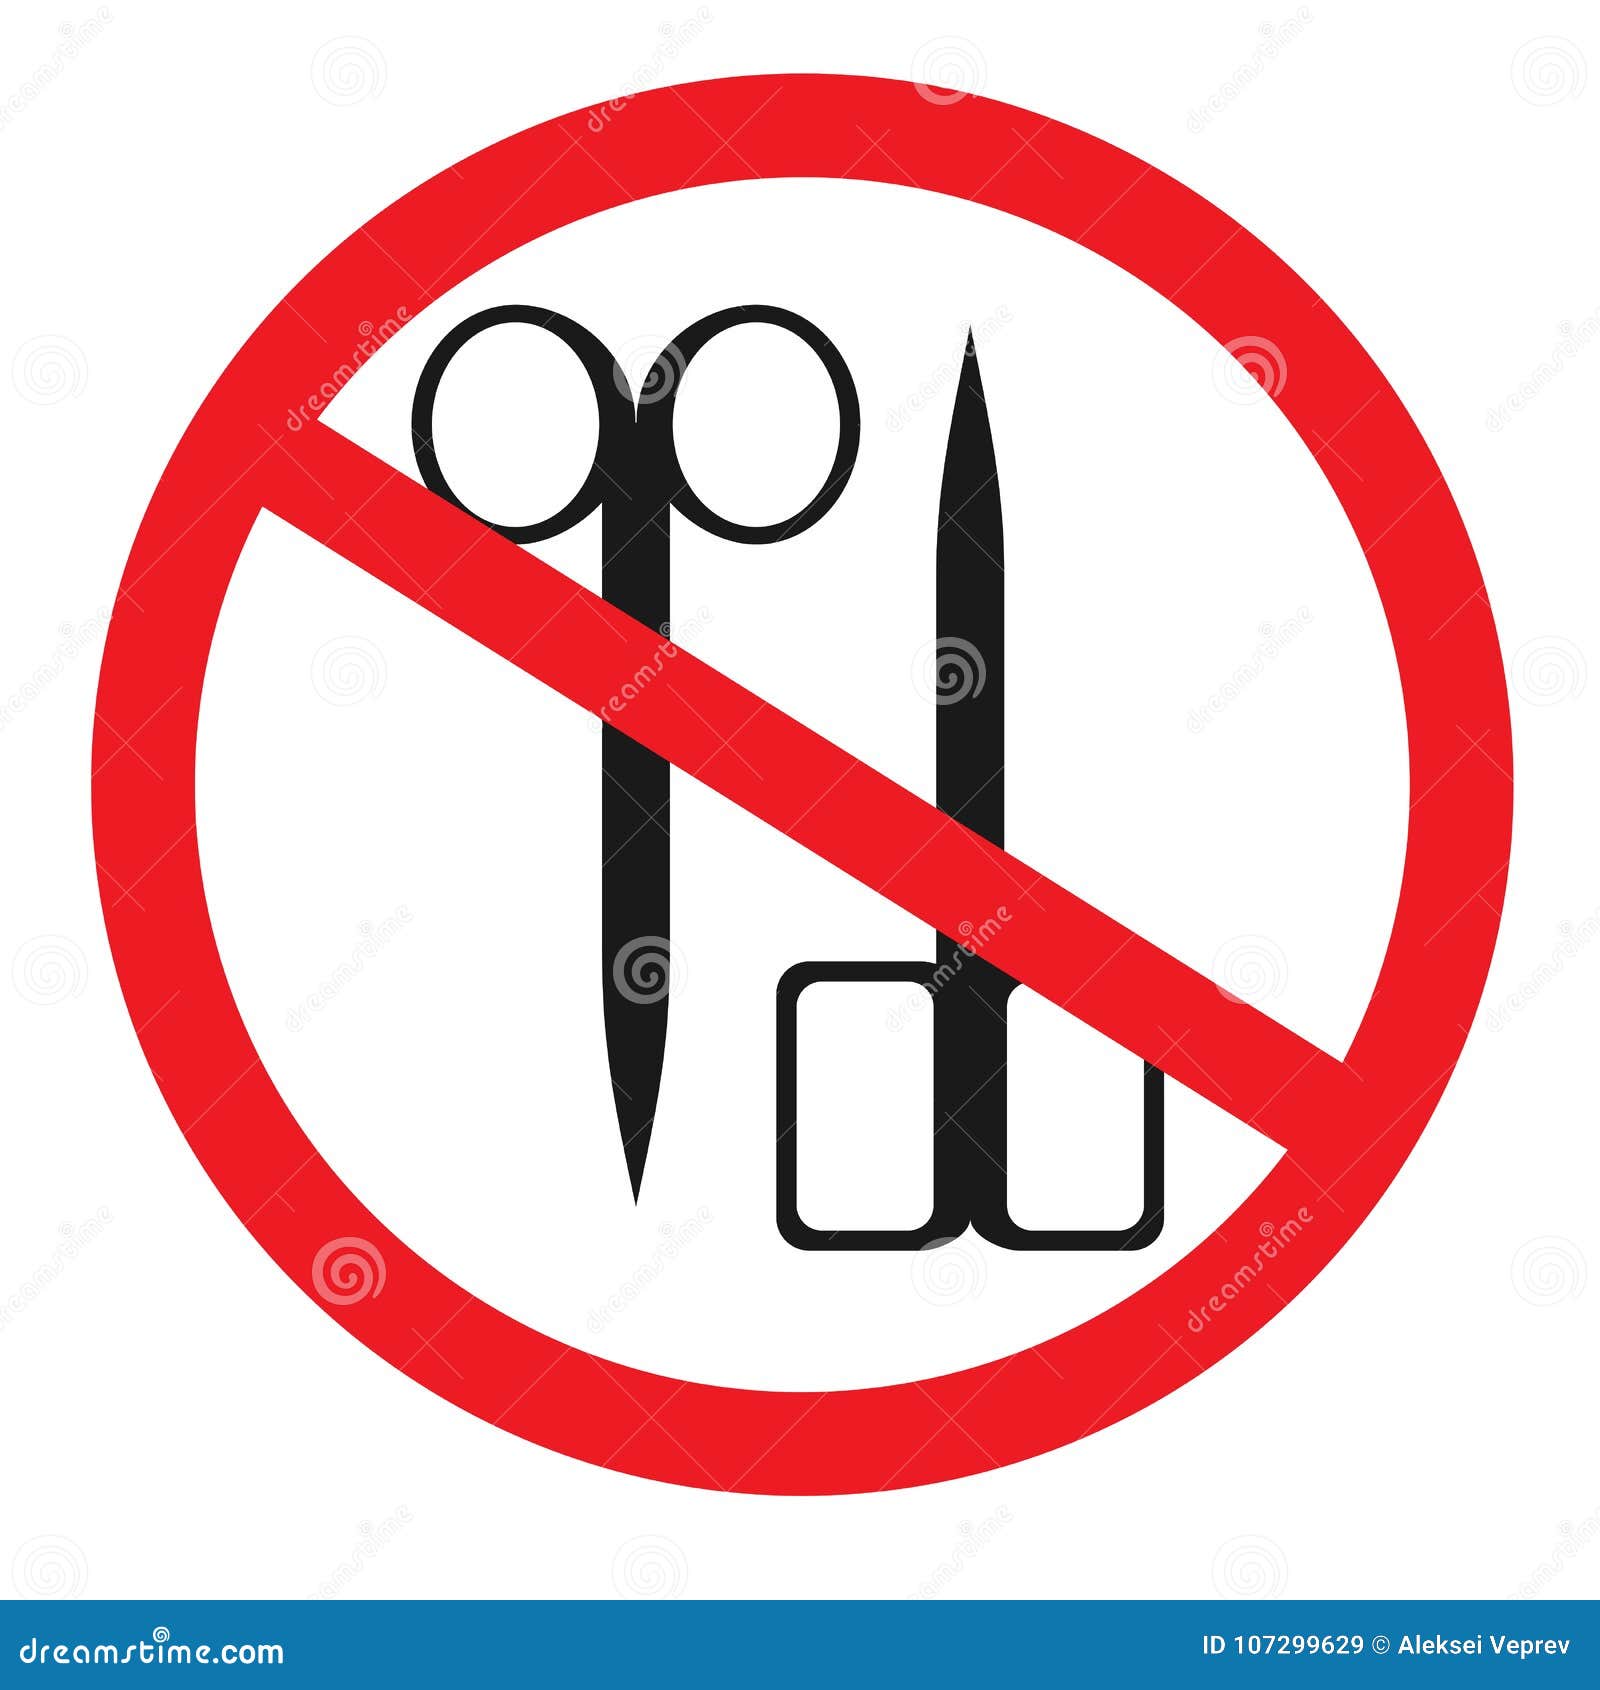 Forbidden sign with scissors glyph icon. No cutting prohibition. Stop silhouette symbol. Negative space. Vector isolated illustration